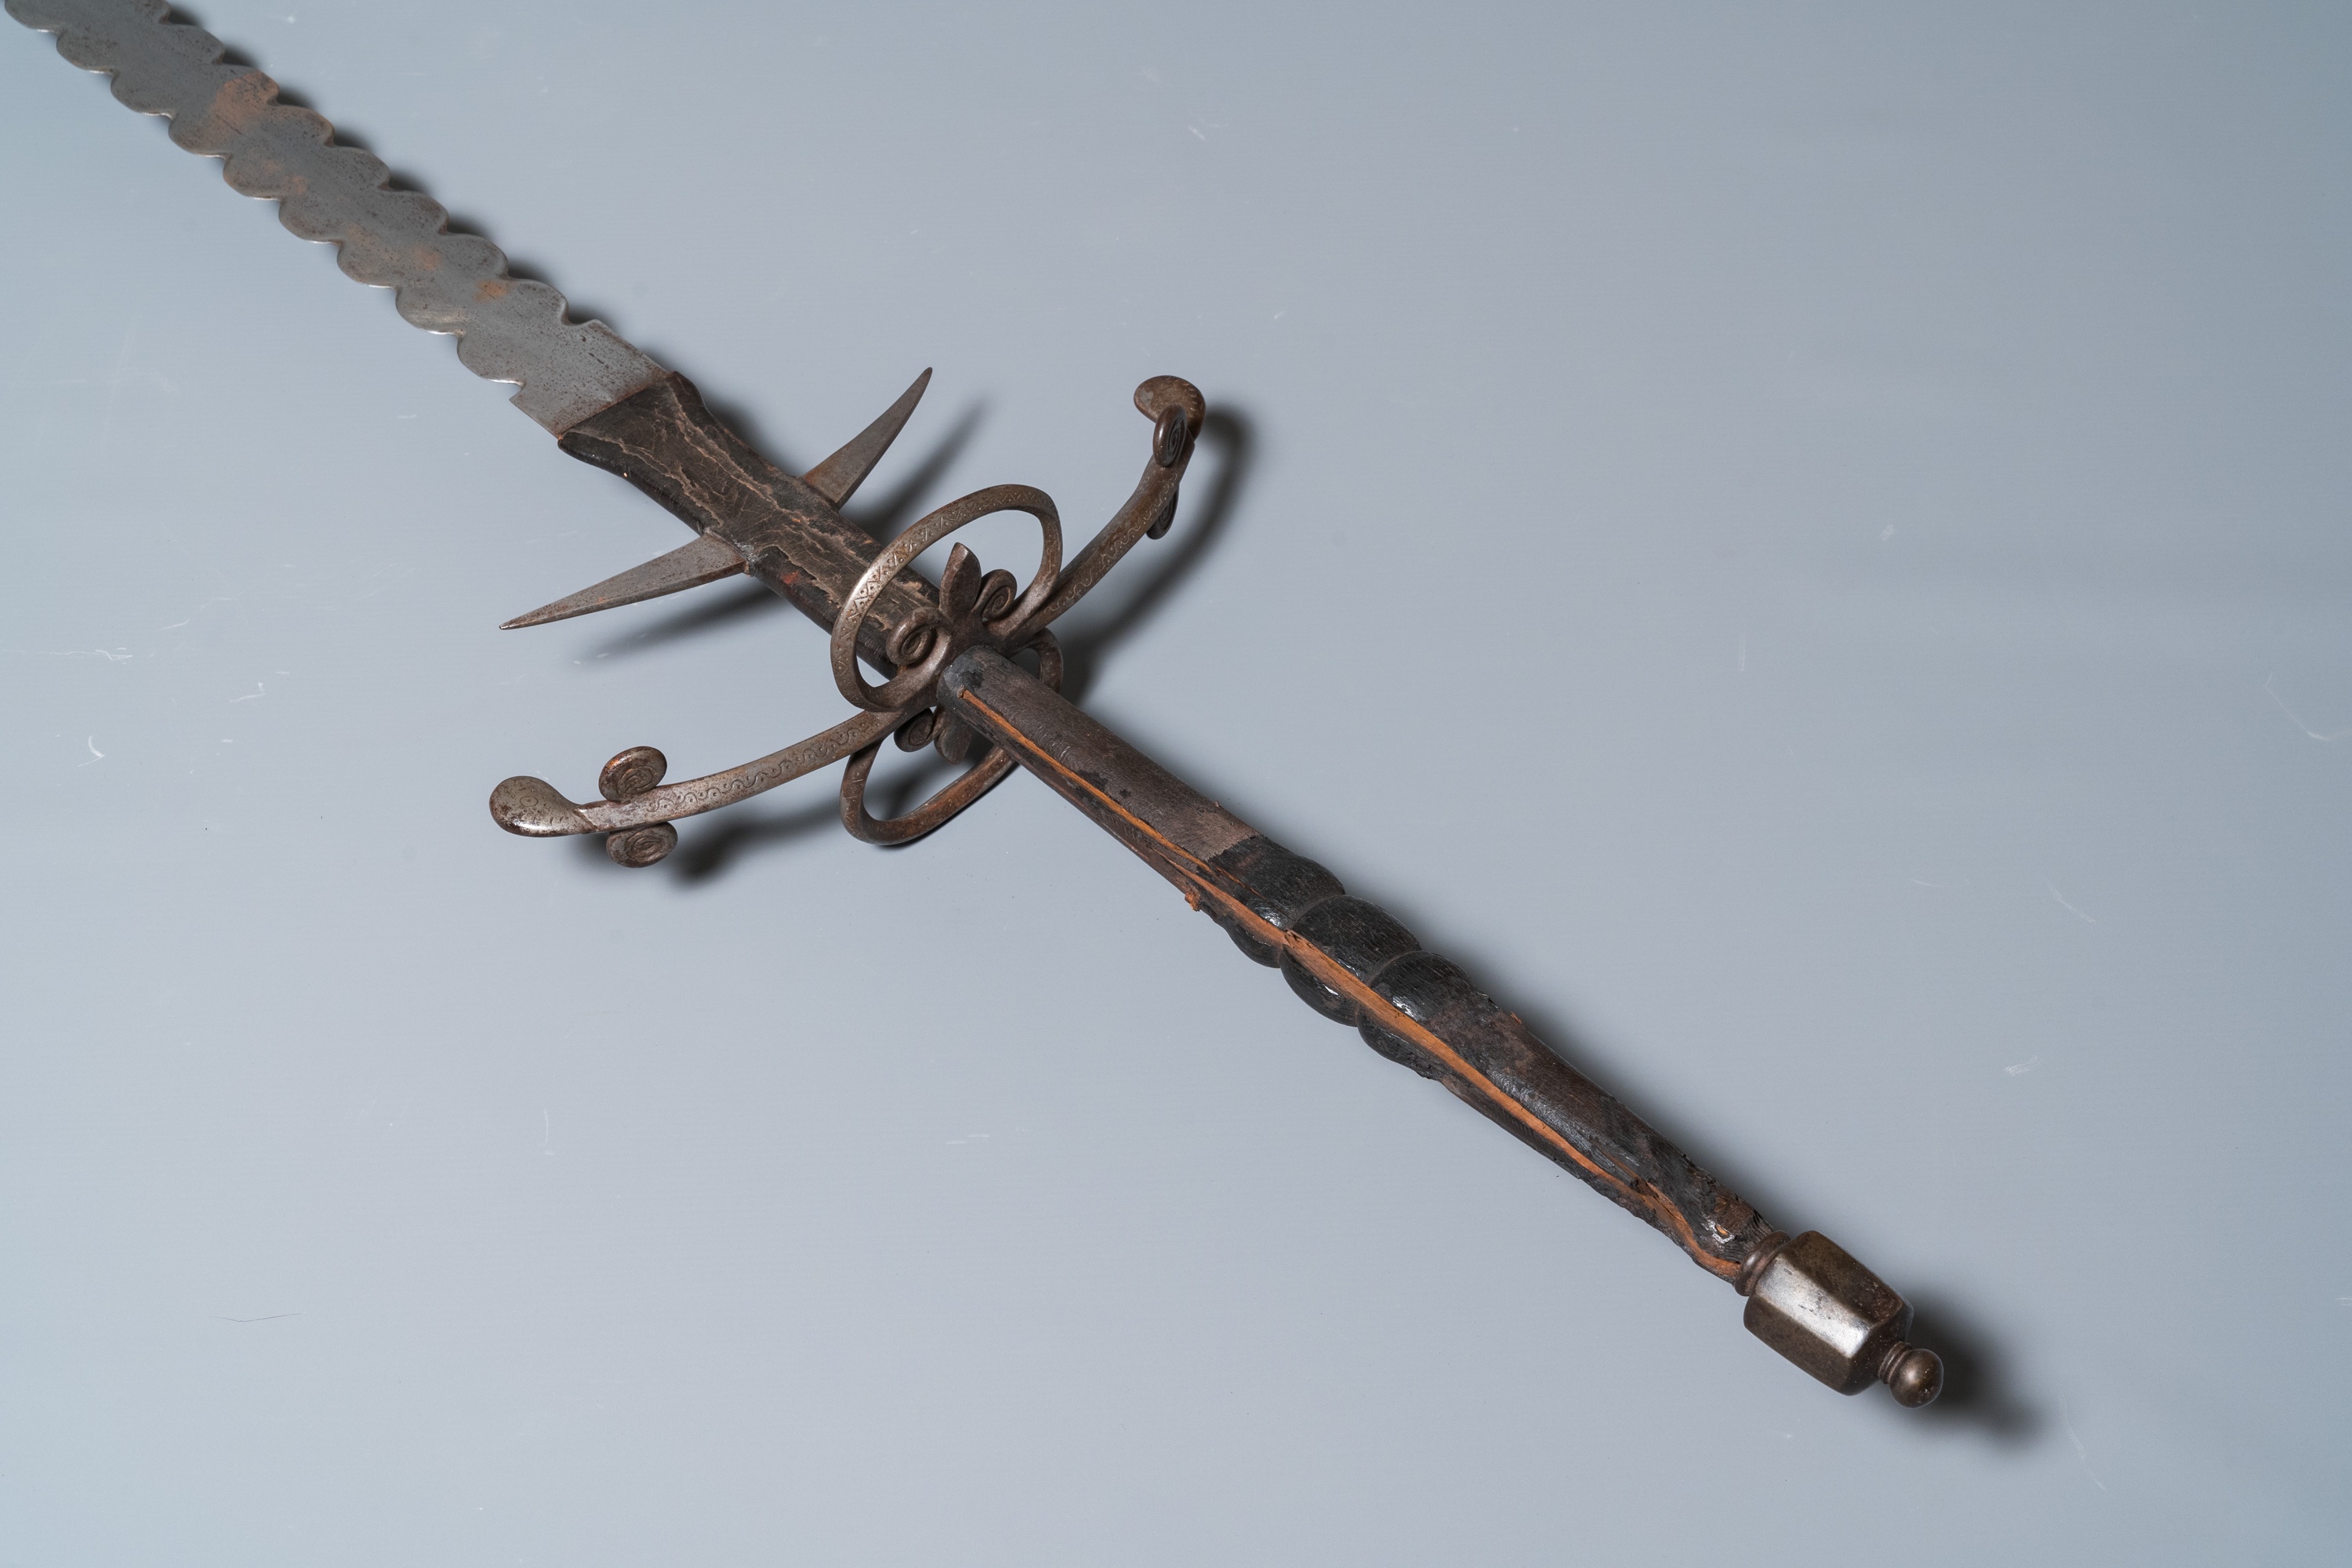 A large two-handed 'Flamberge' sword, Germany, 2nd half 16th C. - Image 5 of 9